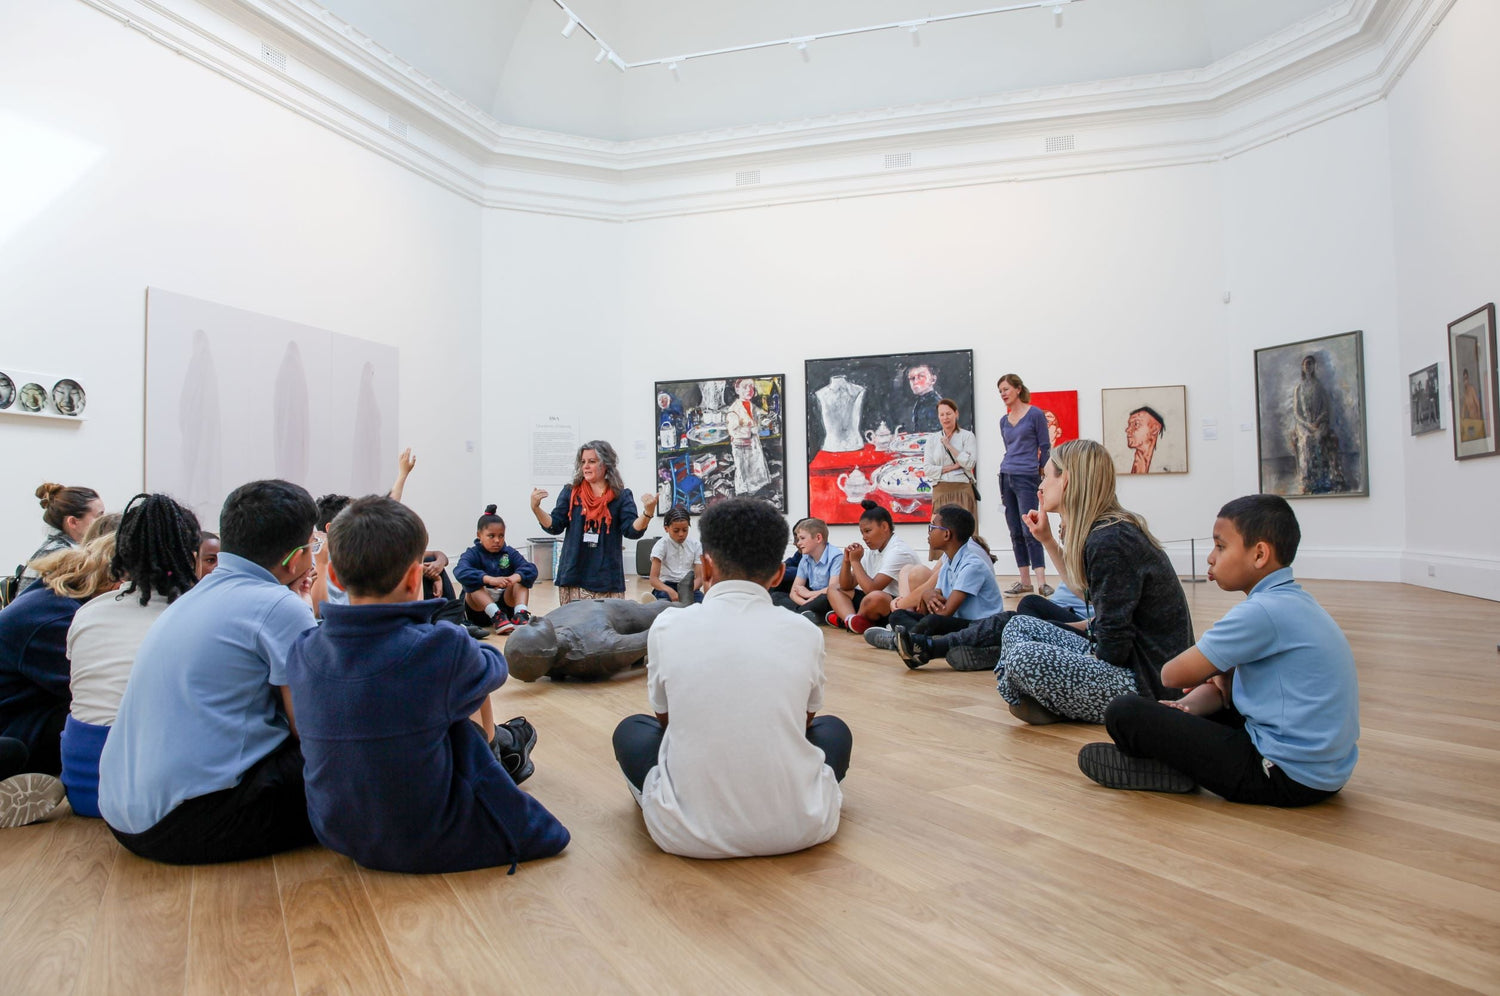 A group of school children sit in a circle surrounding a metal sculpture of a man lying down. They are in a gallery with several artworks hung on white walls. A lady kneels up within the group and gestures to the children. Two people stand behind watching.